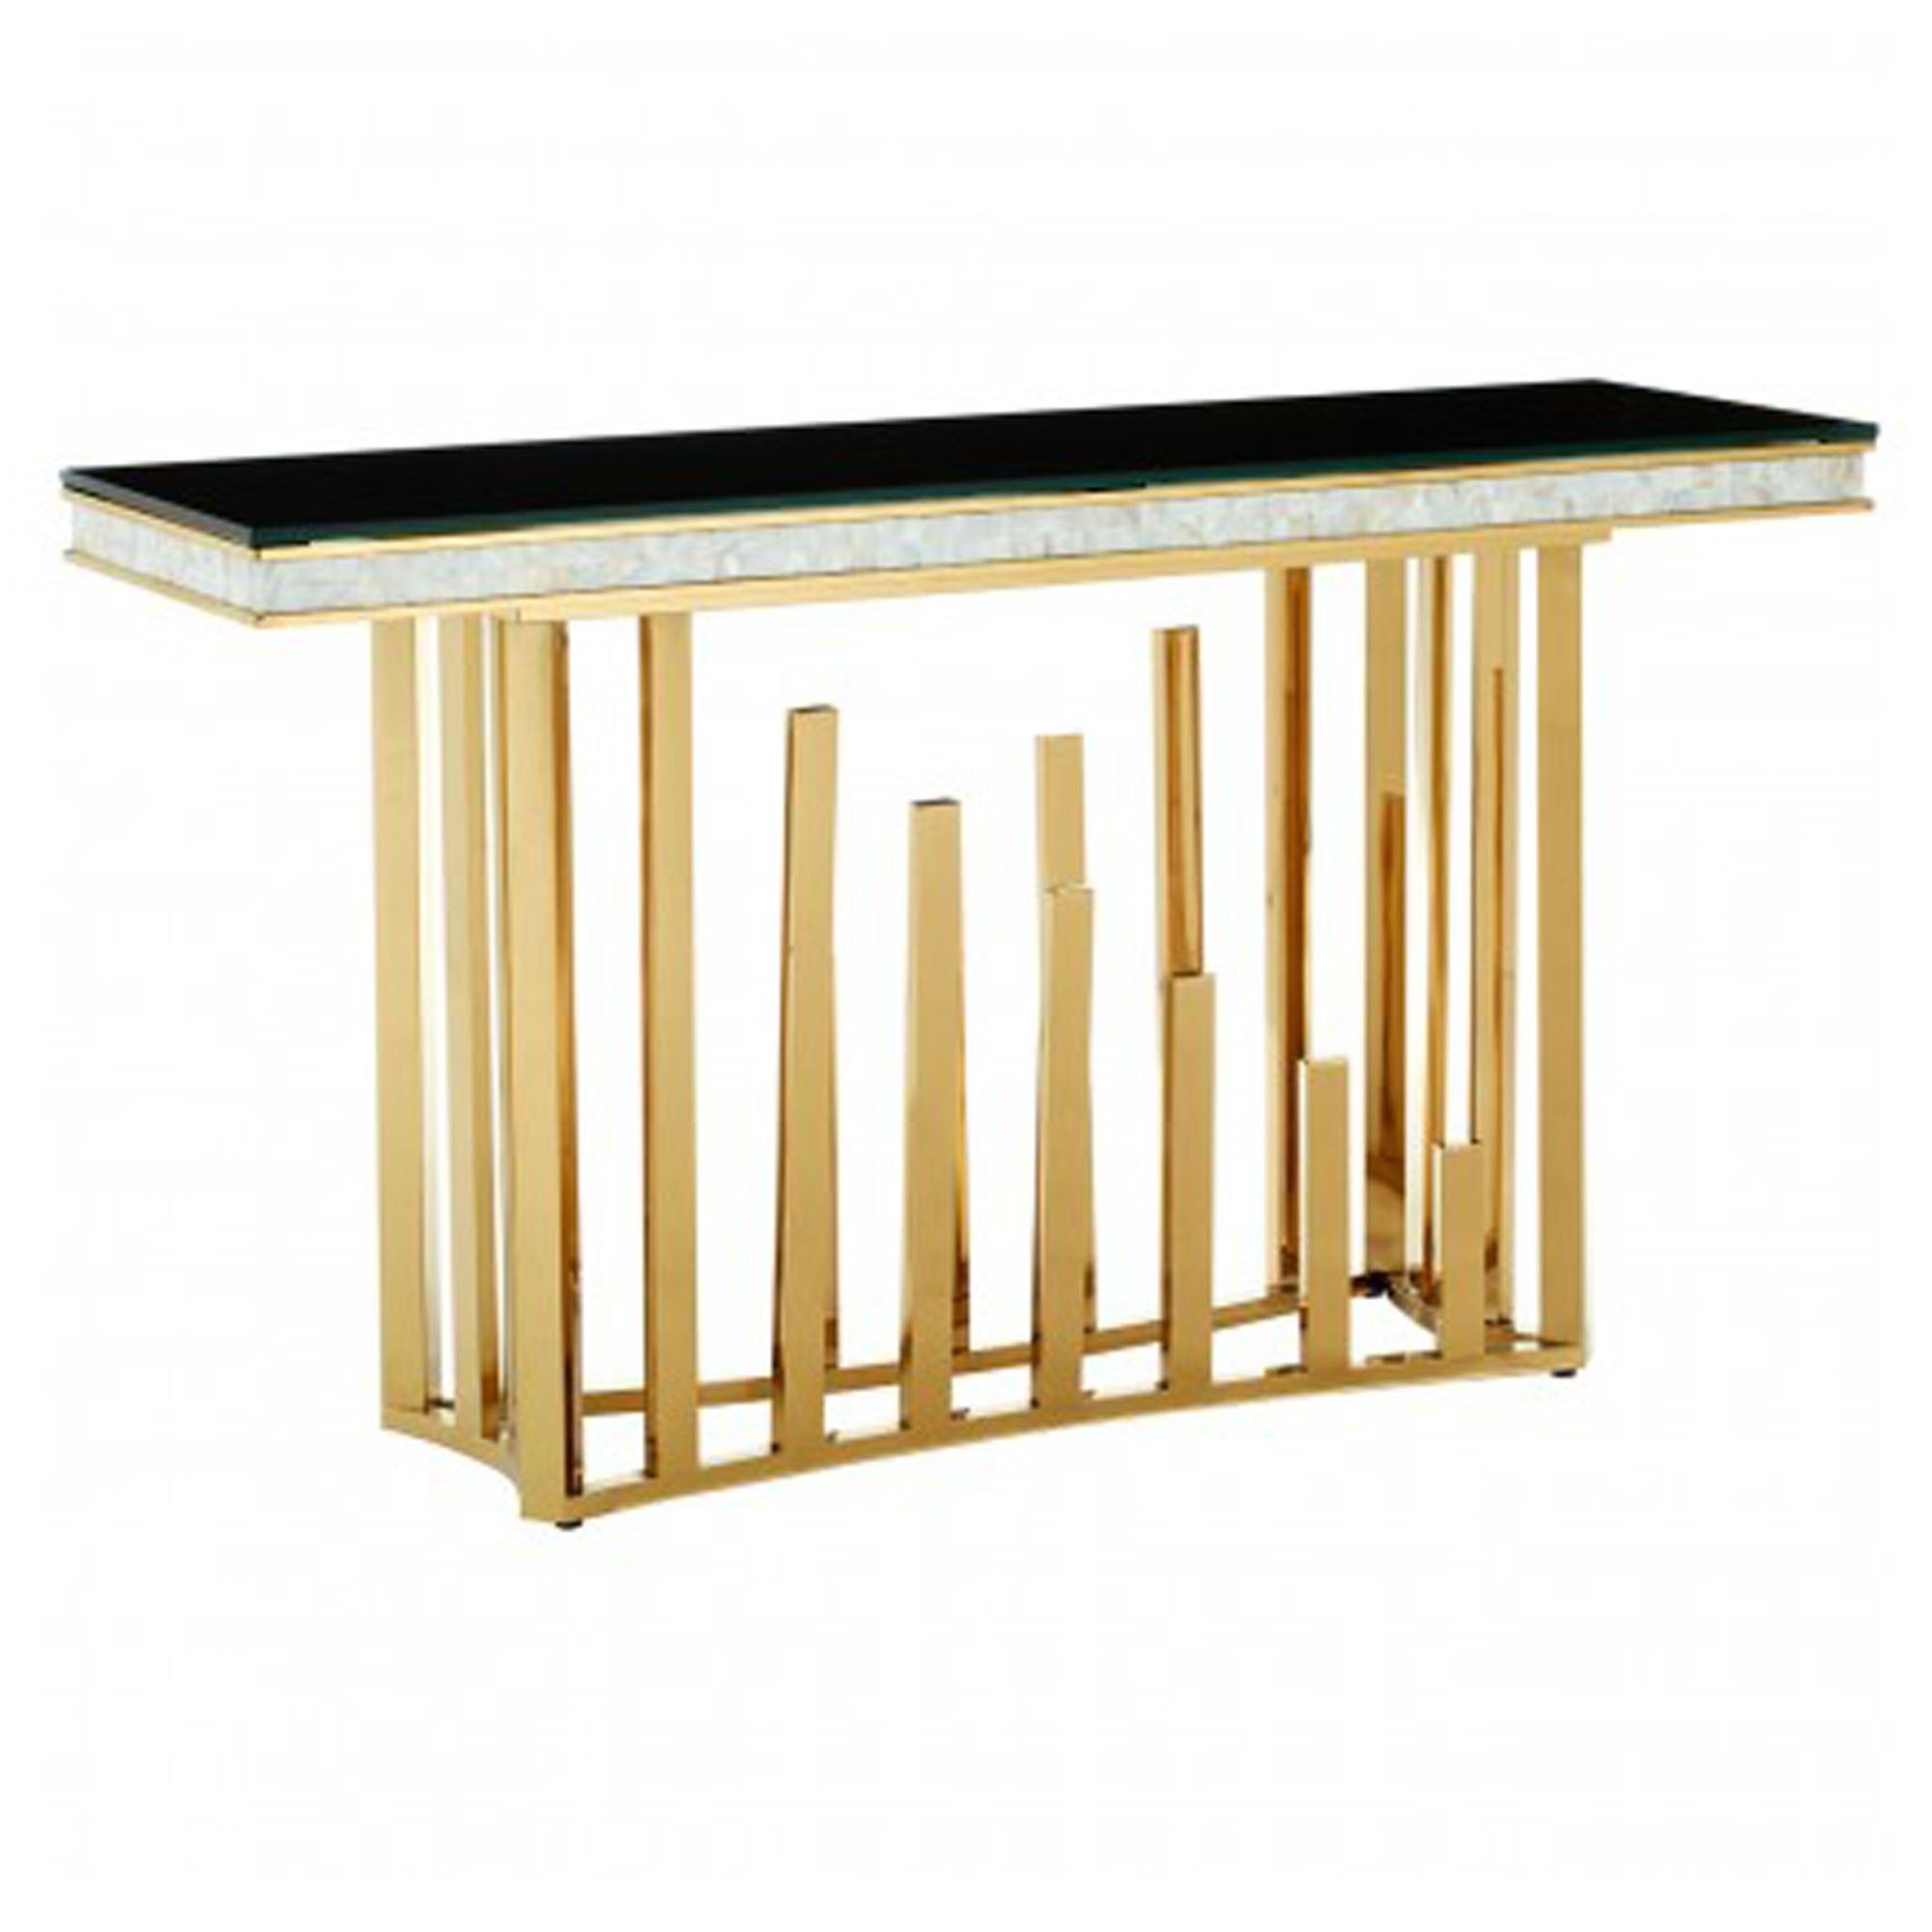 Eliza Gold Finish Console Table | Modern Furniture | Console Tables Regarding Metallic Gold Console Tables (View 14 of 20)